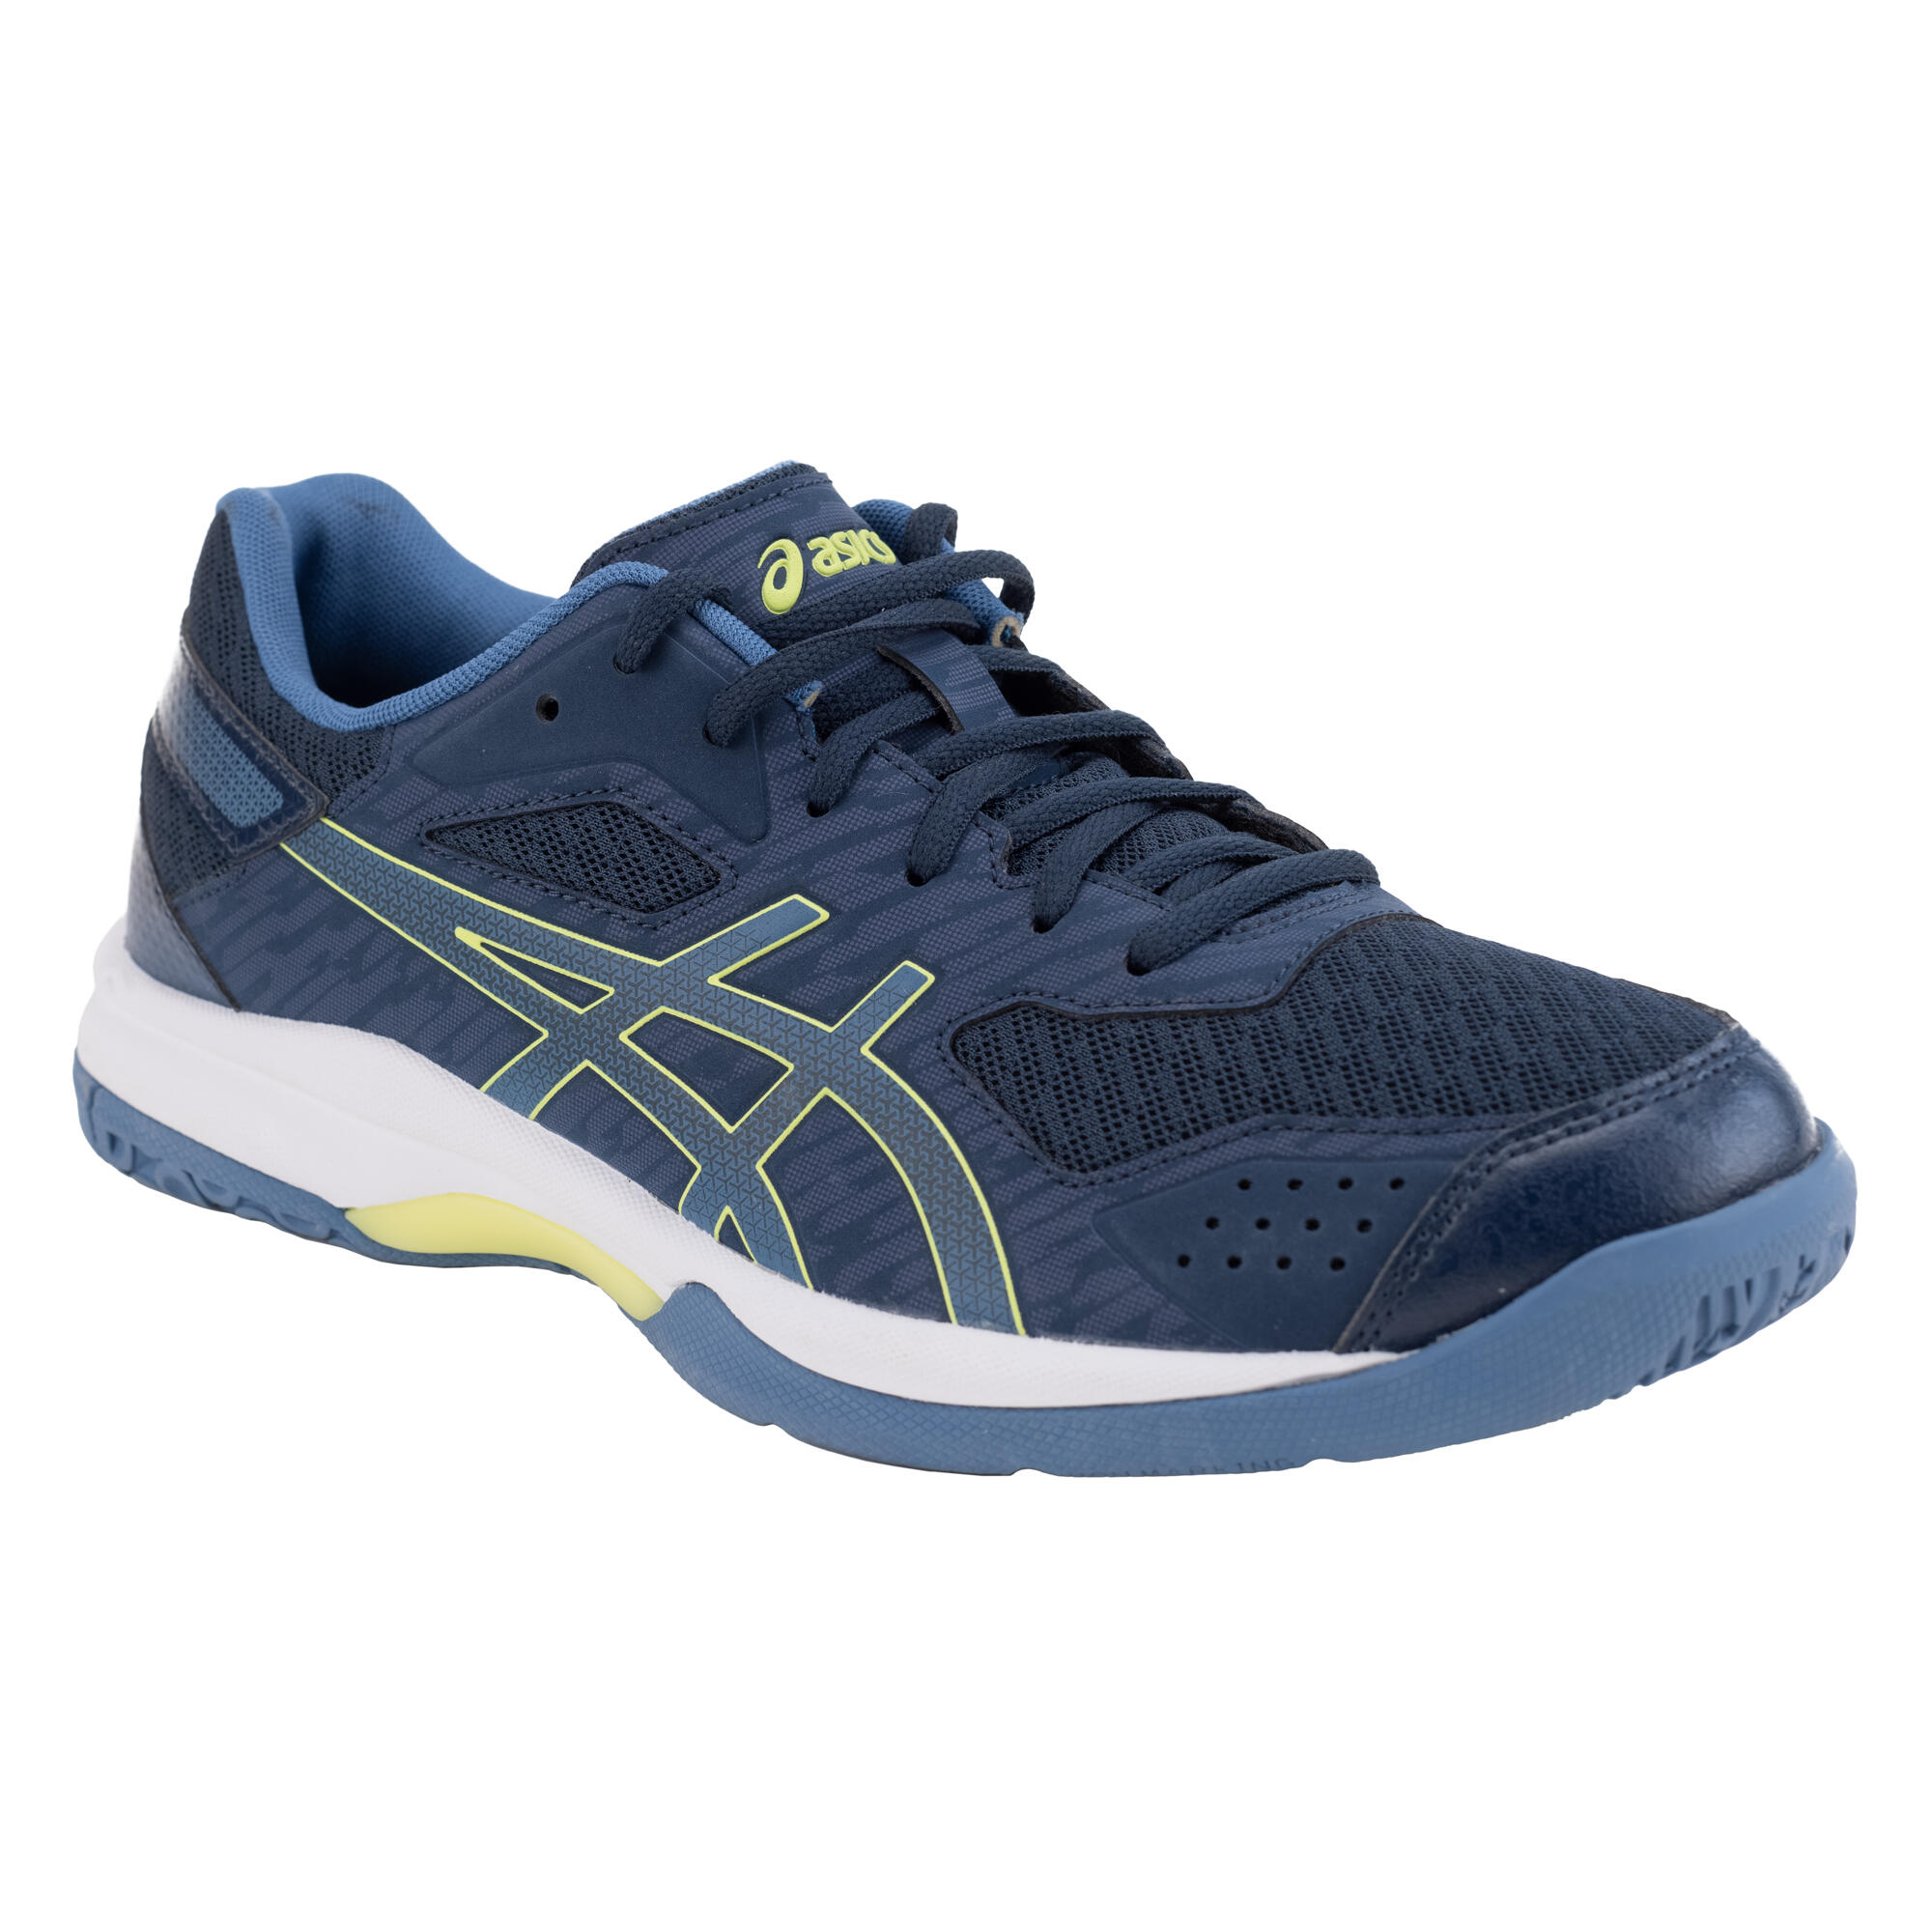 ASICS Men's Volleyball Shoes Gel Spike - Blue/white/yellow